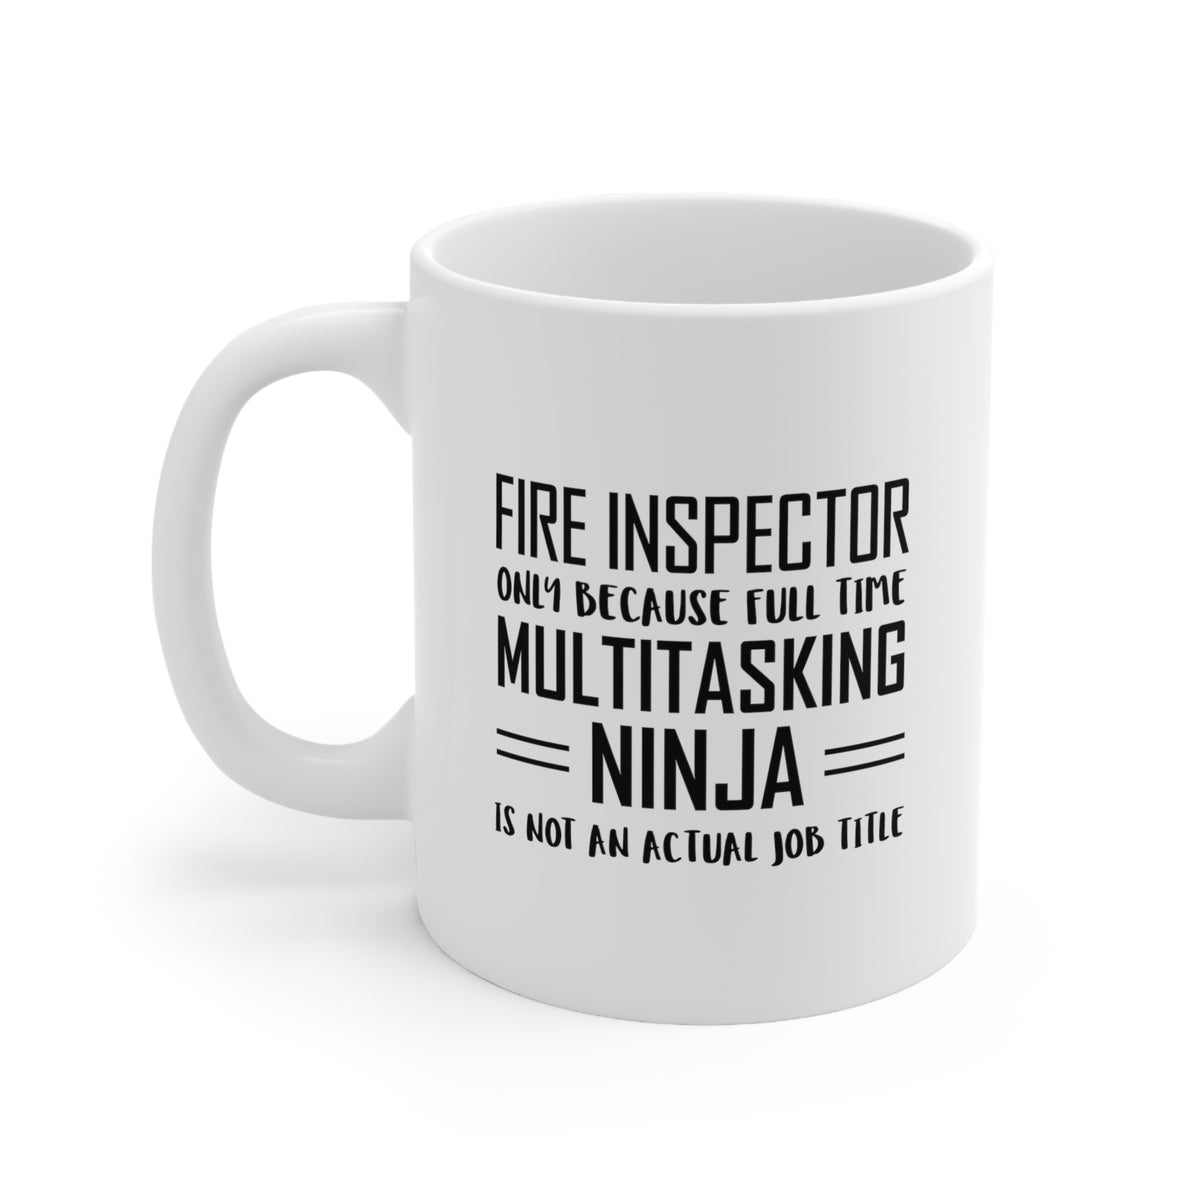 Fire inspector Coffee Mug - Full Time Multitasking Ninja - Unique Funny Inspirational Sarcasm Gift for Men and Women